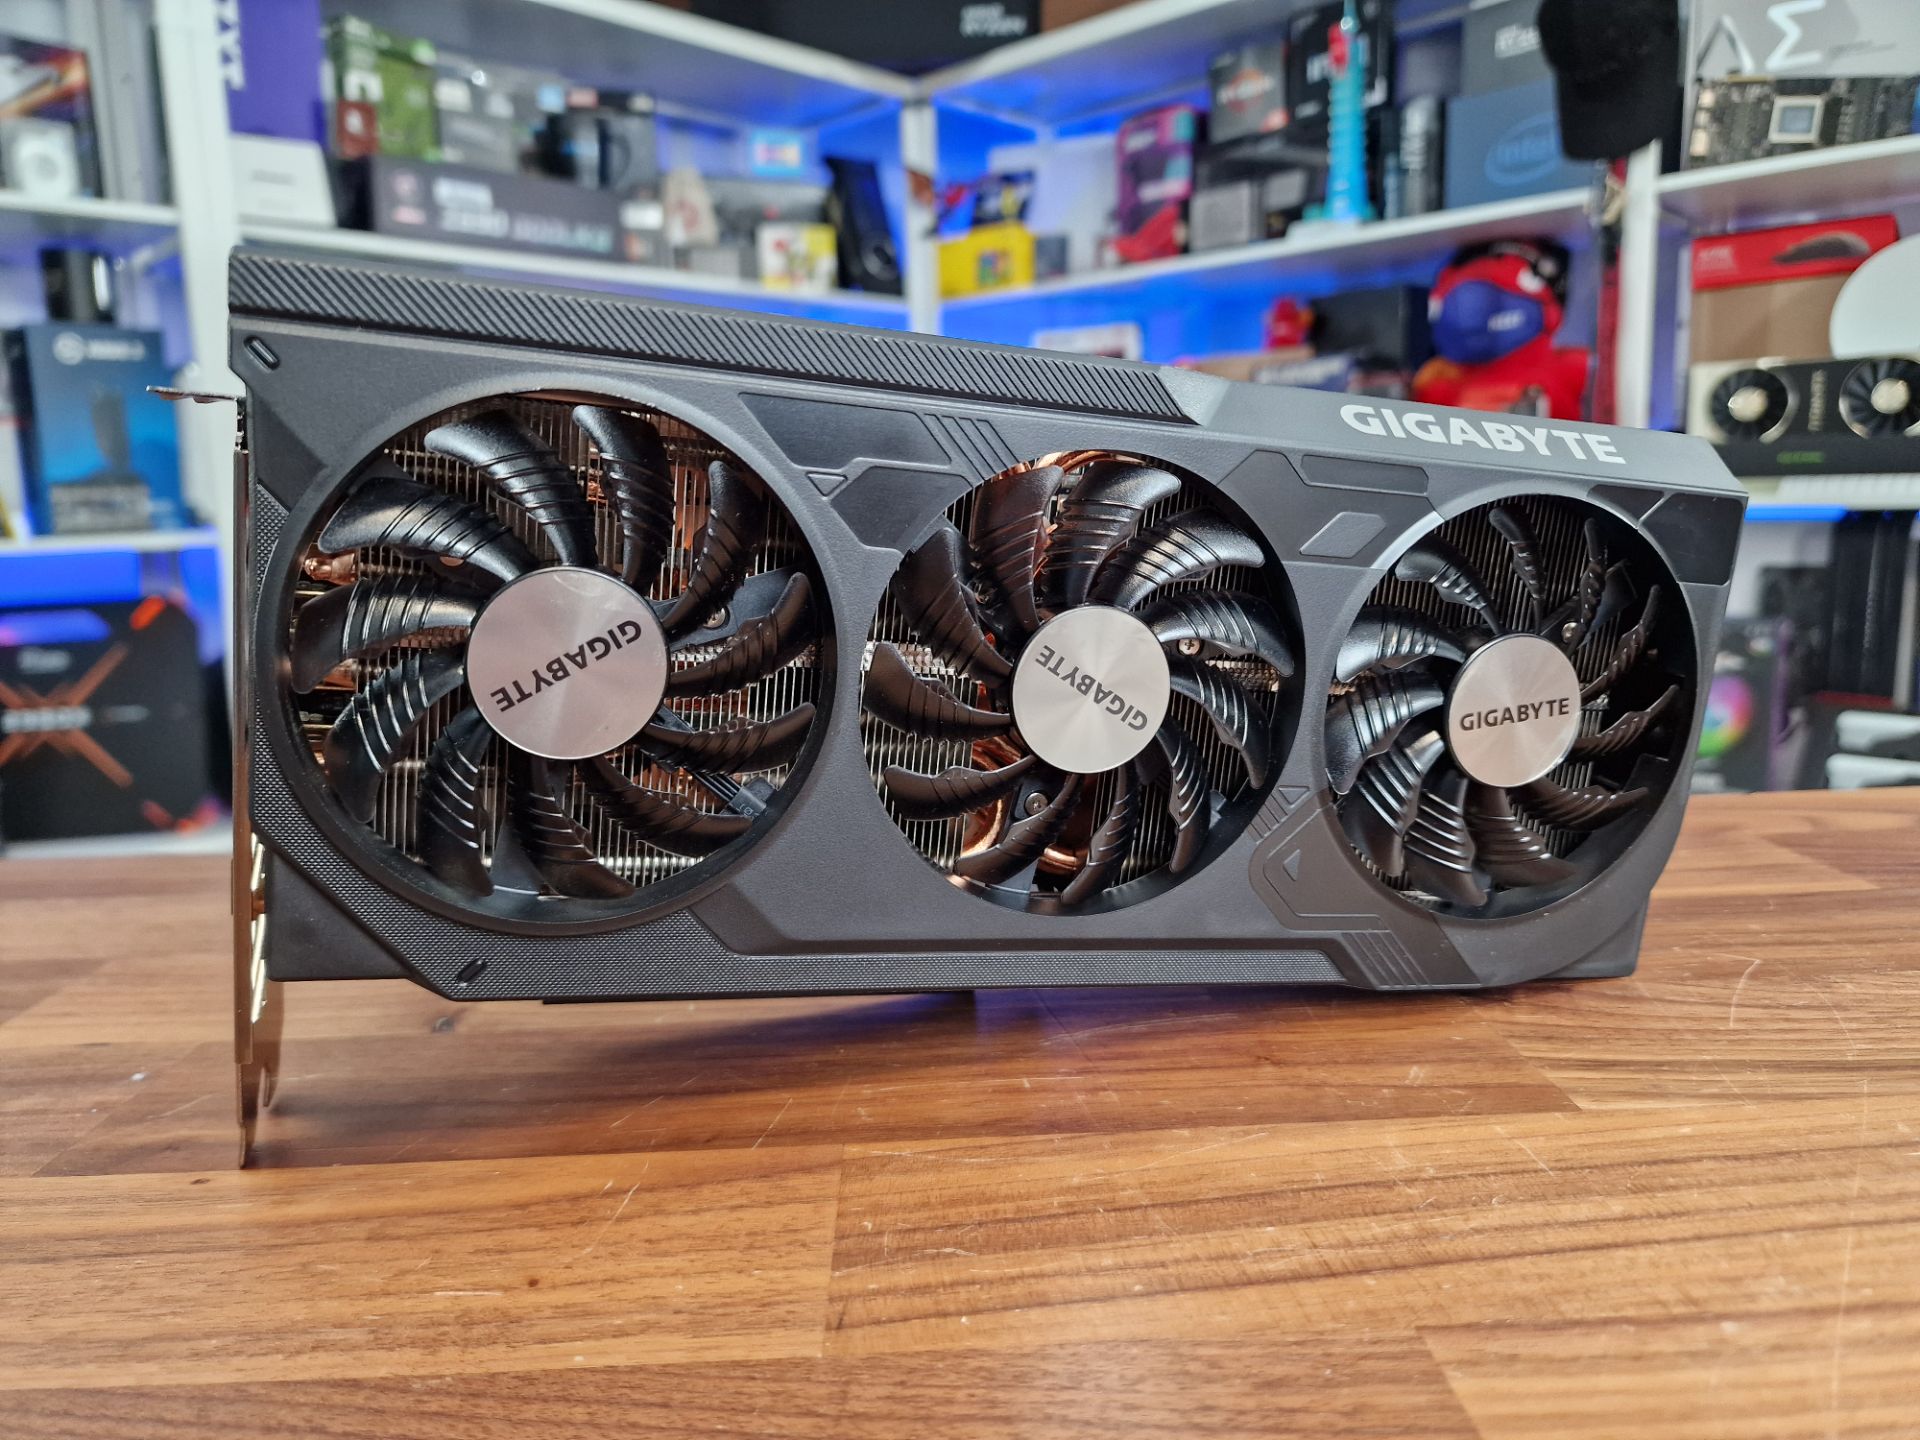 Nvidia RTX 4070 Ti review: not the GPU you're looking for